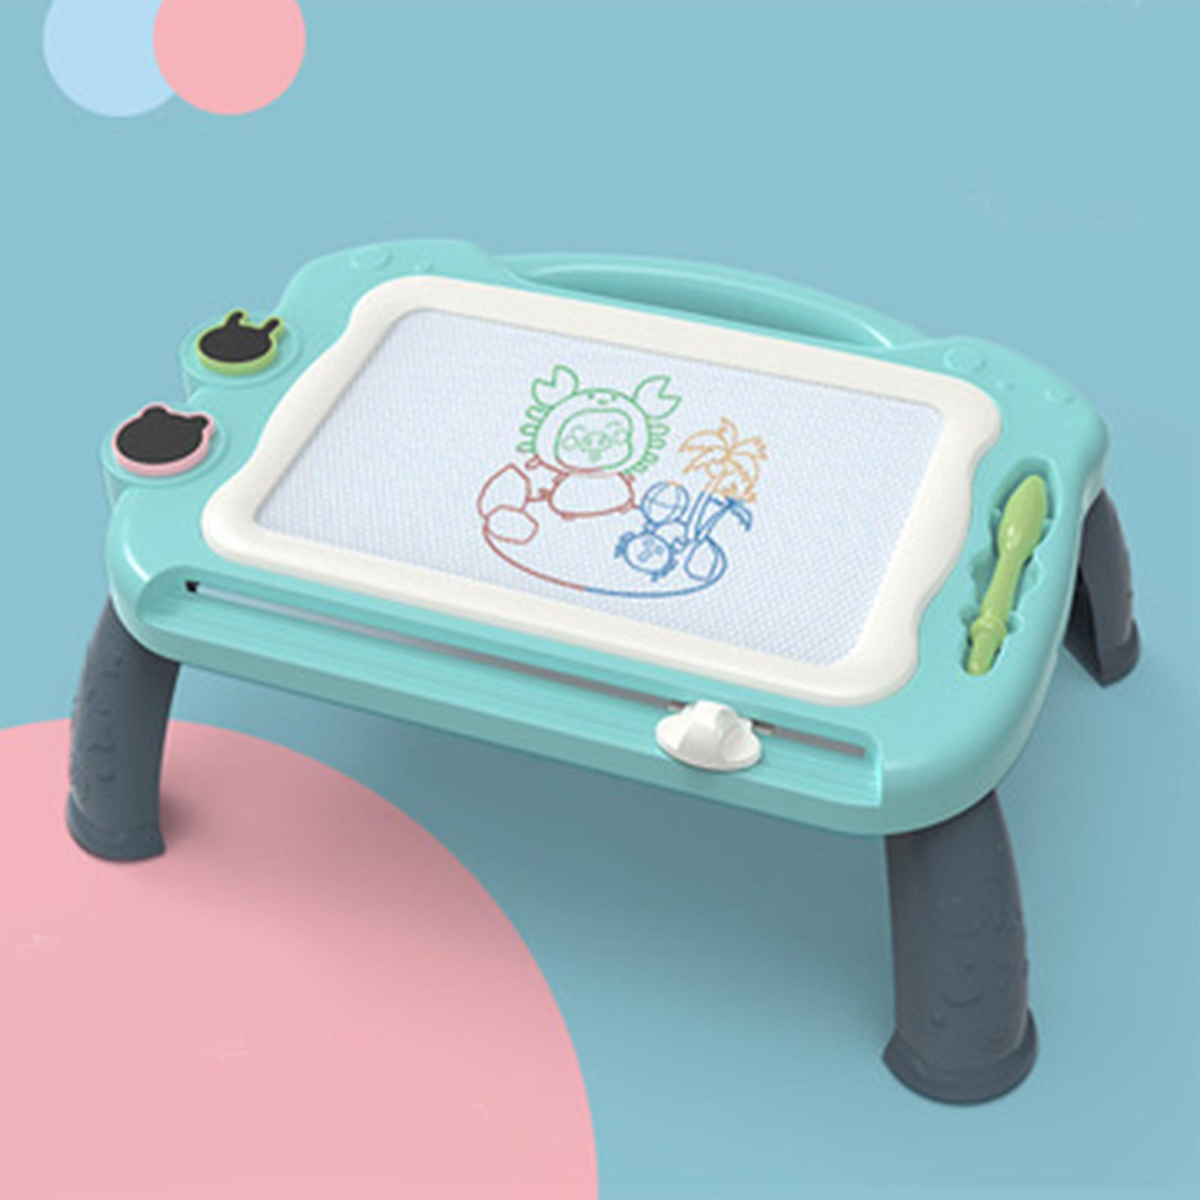 https://tinyjumps.com/wp-content/uploads/2022/04/Baby-large-color-magnetic-drawing-board-ThumbnailsArtboard-12.jpg